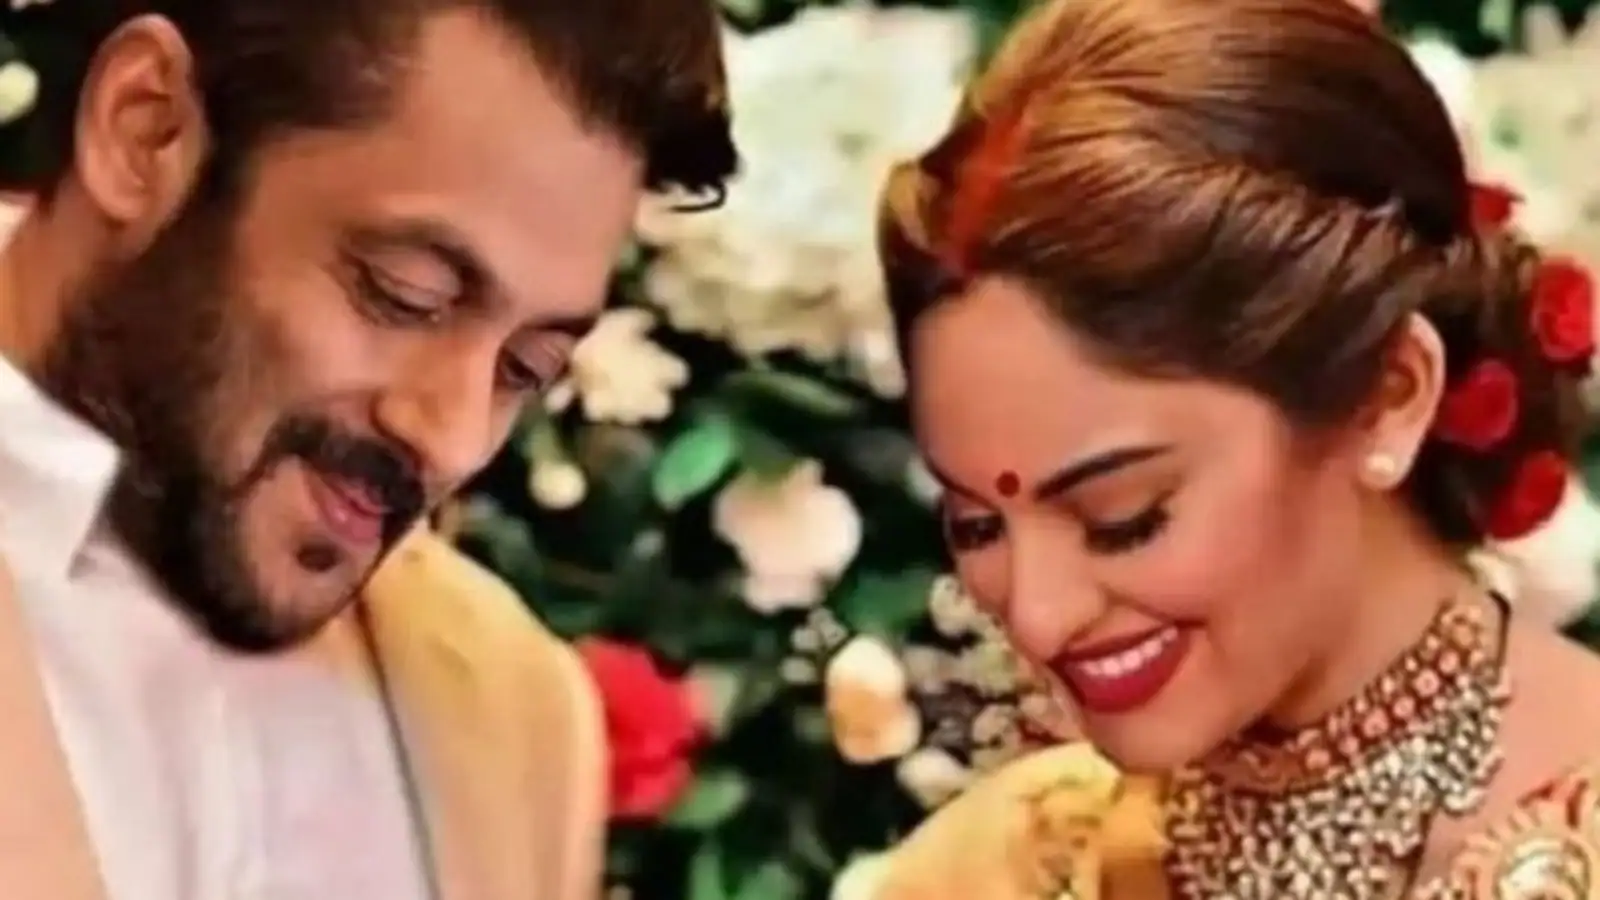 Sonakshi Sinha reacts to fake marriage pic with Salman Khan: ‘Are you so dumb that you can’t tell…’